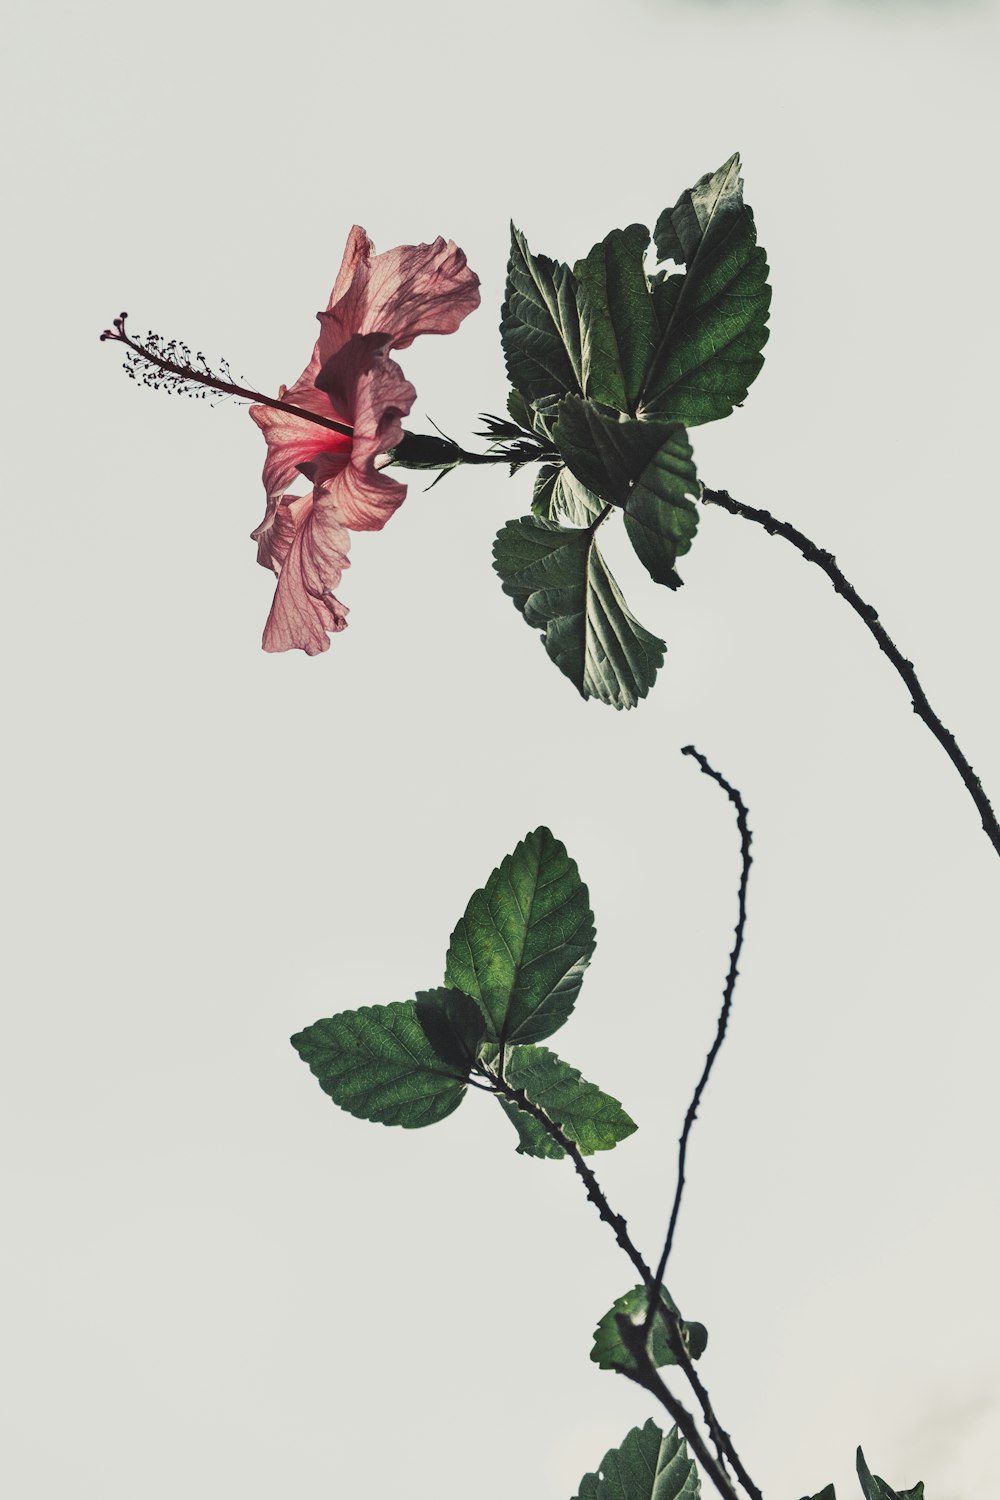 1500+ Flowers Aesthetic Pictures | Download Free Images on Unsplash